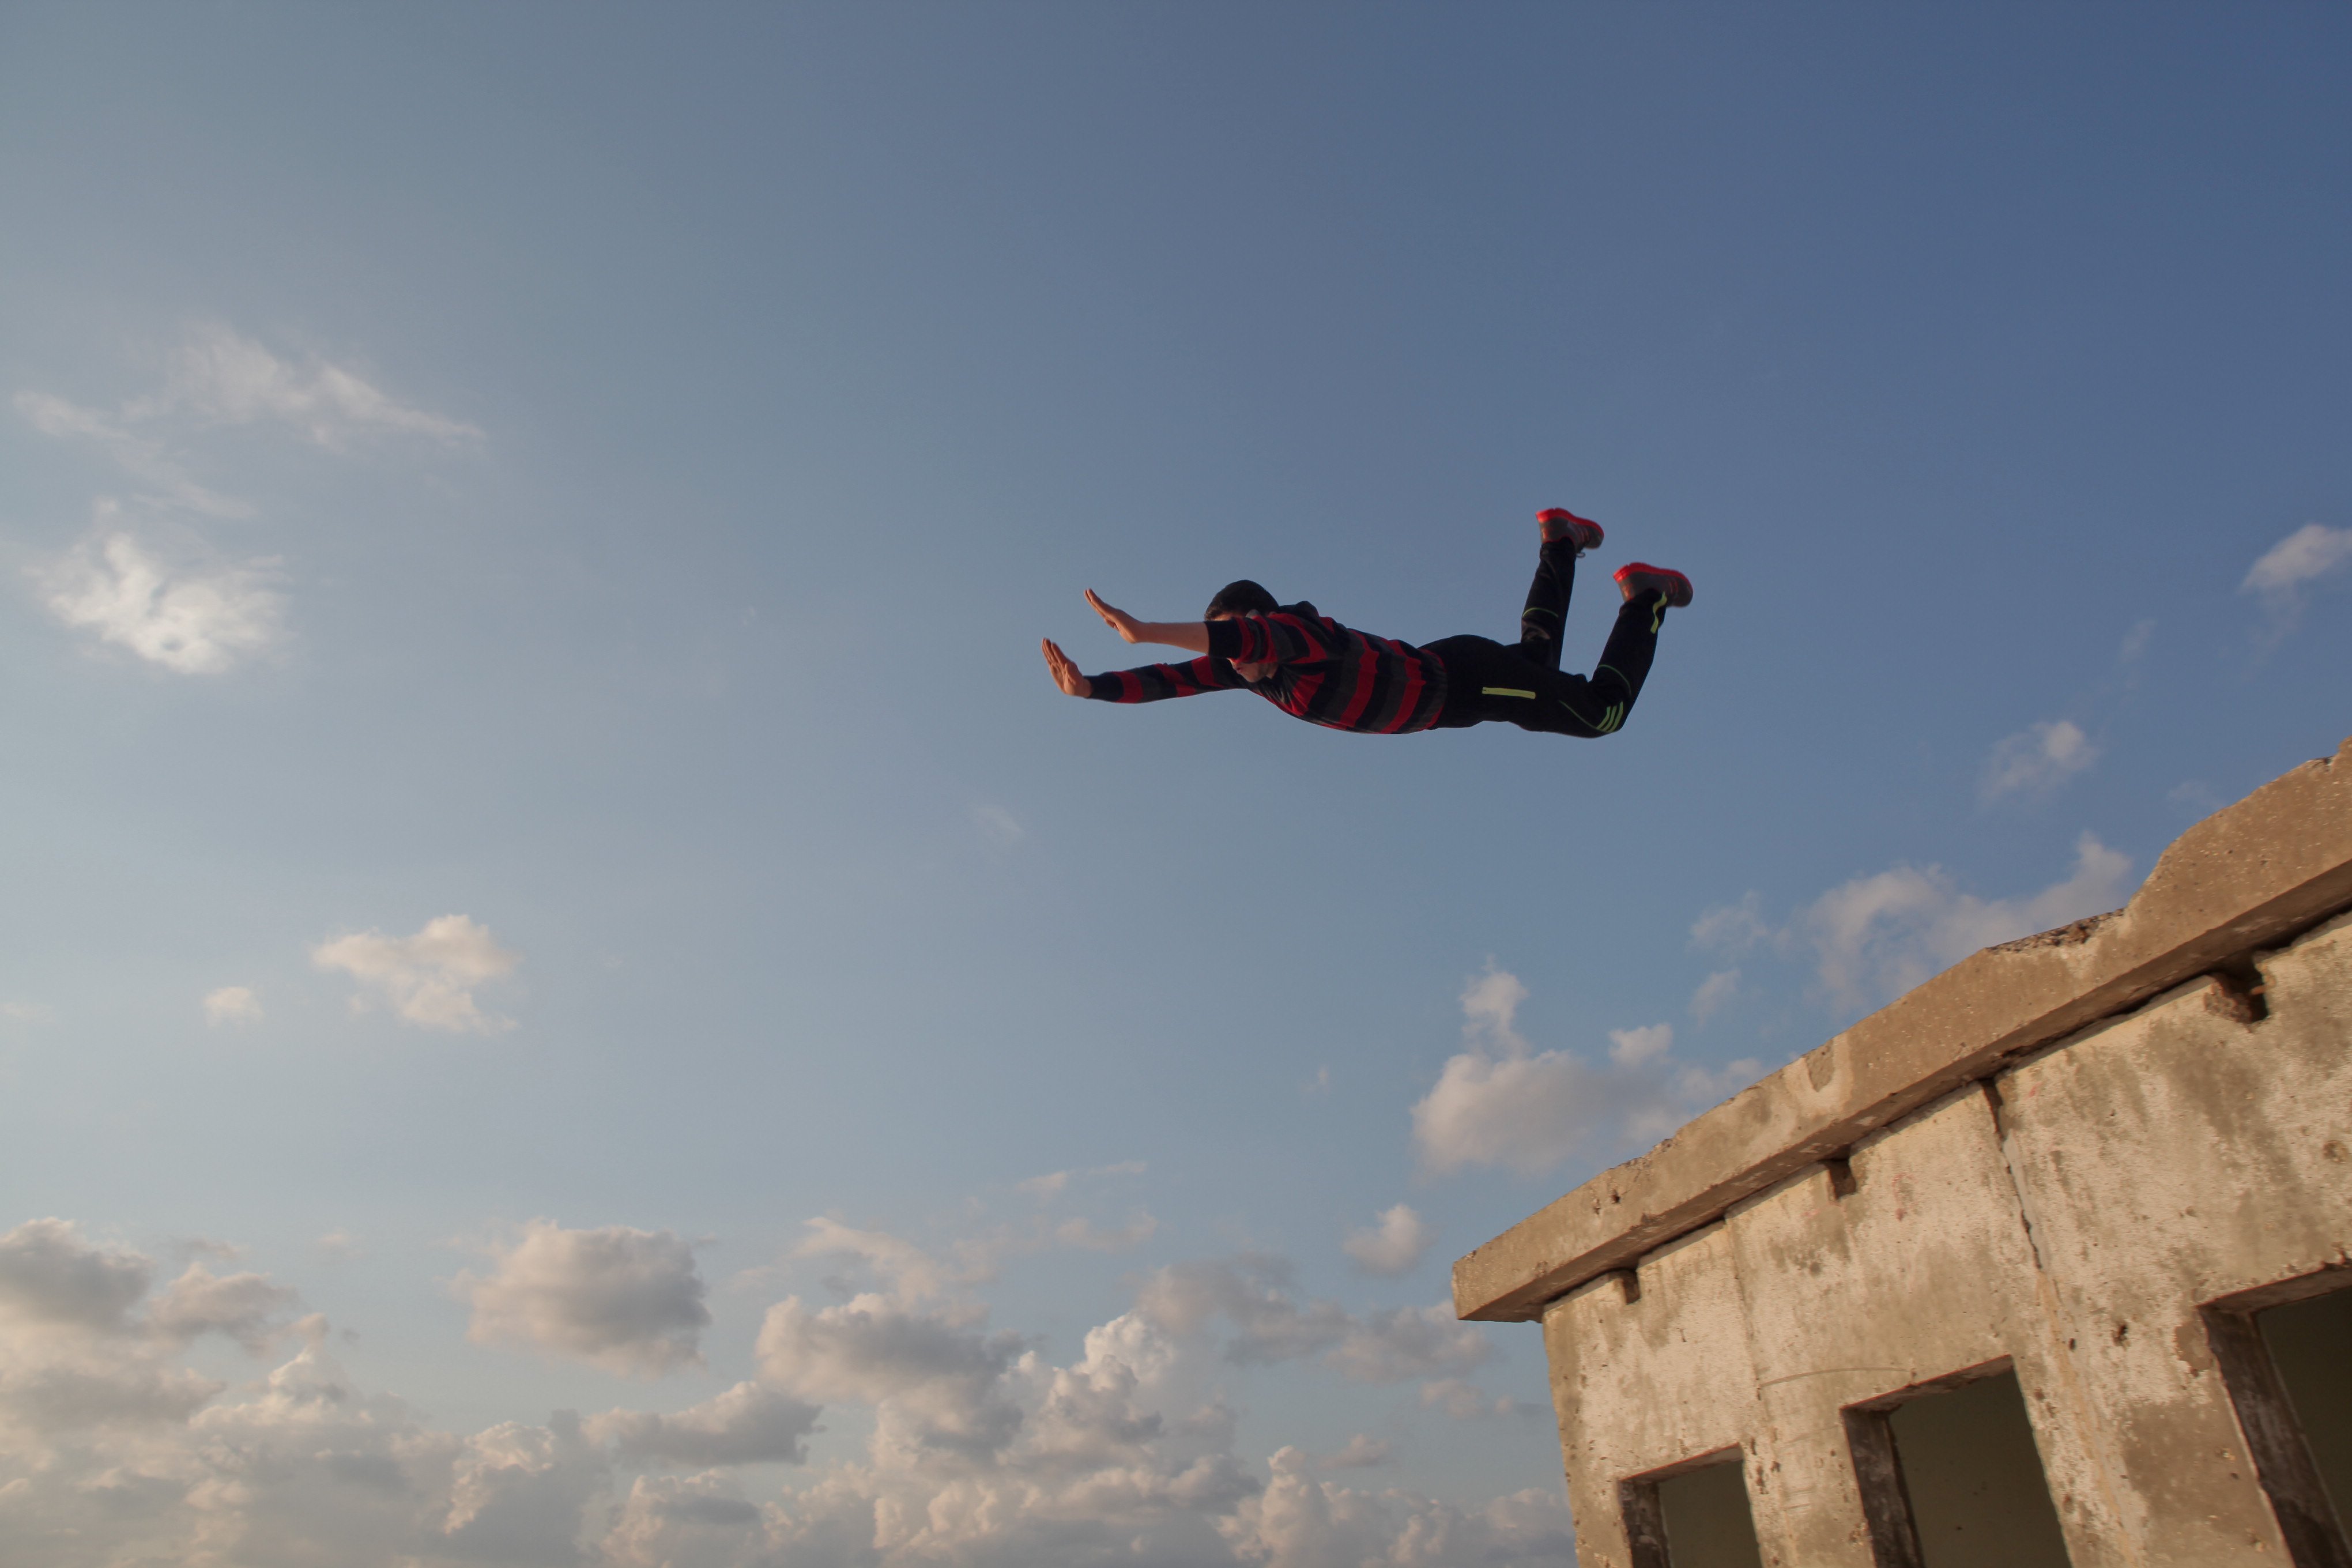 Apr. 16, 2014. A Palestinian youth practices parkour skills in Gaza, Palestinian Territory.  Parkour is a holistic training discipline using movement that developed from military obstacle course training.